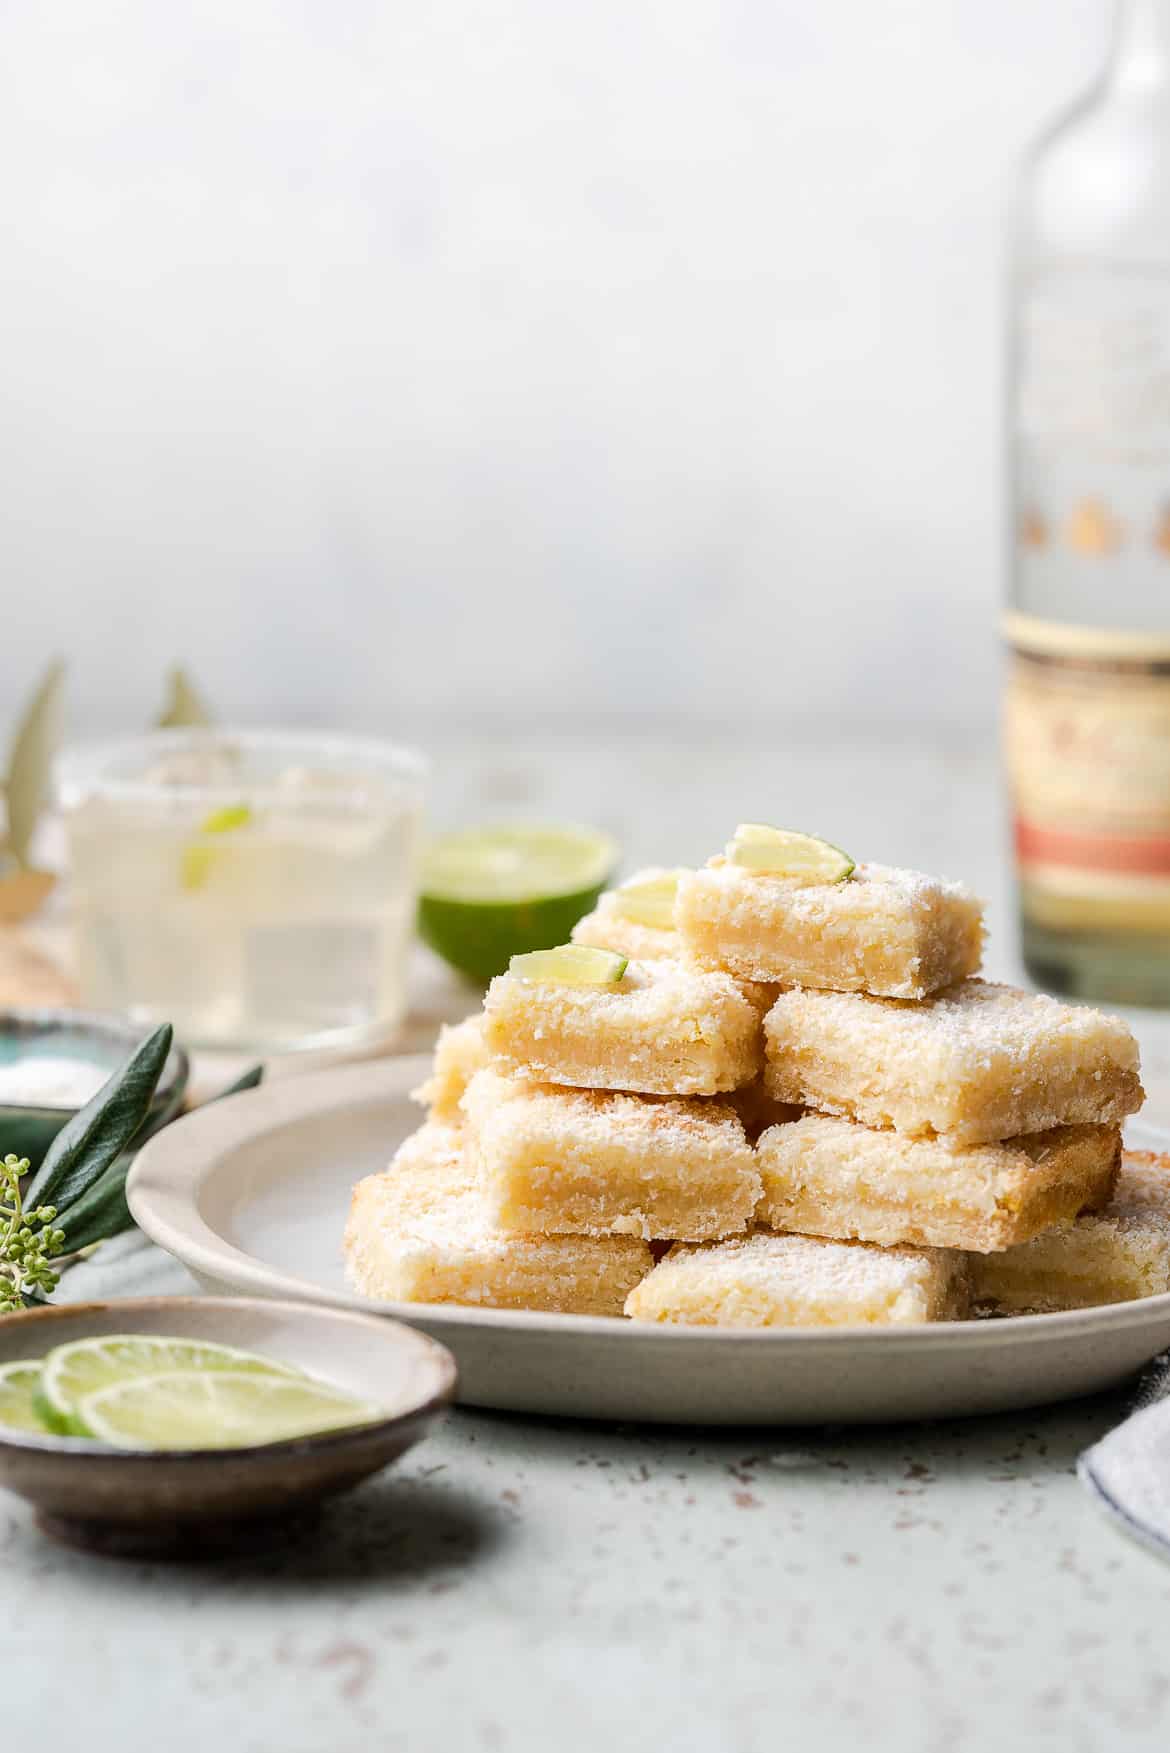 Margarita bars sliced and stacked on a plate.